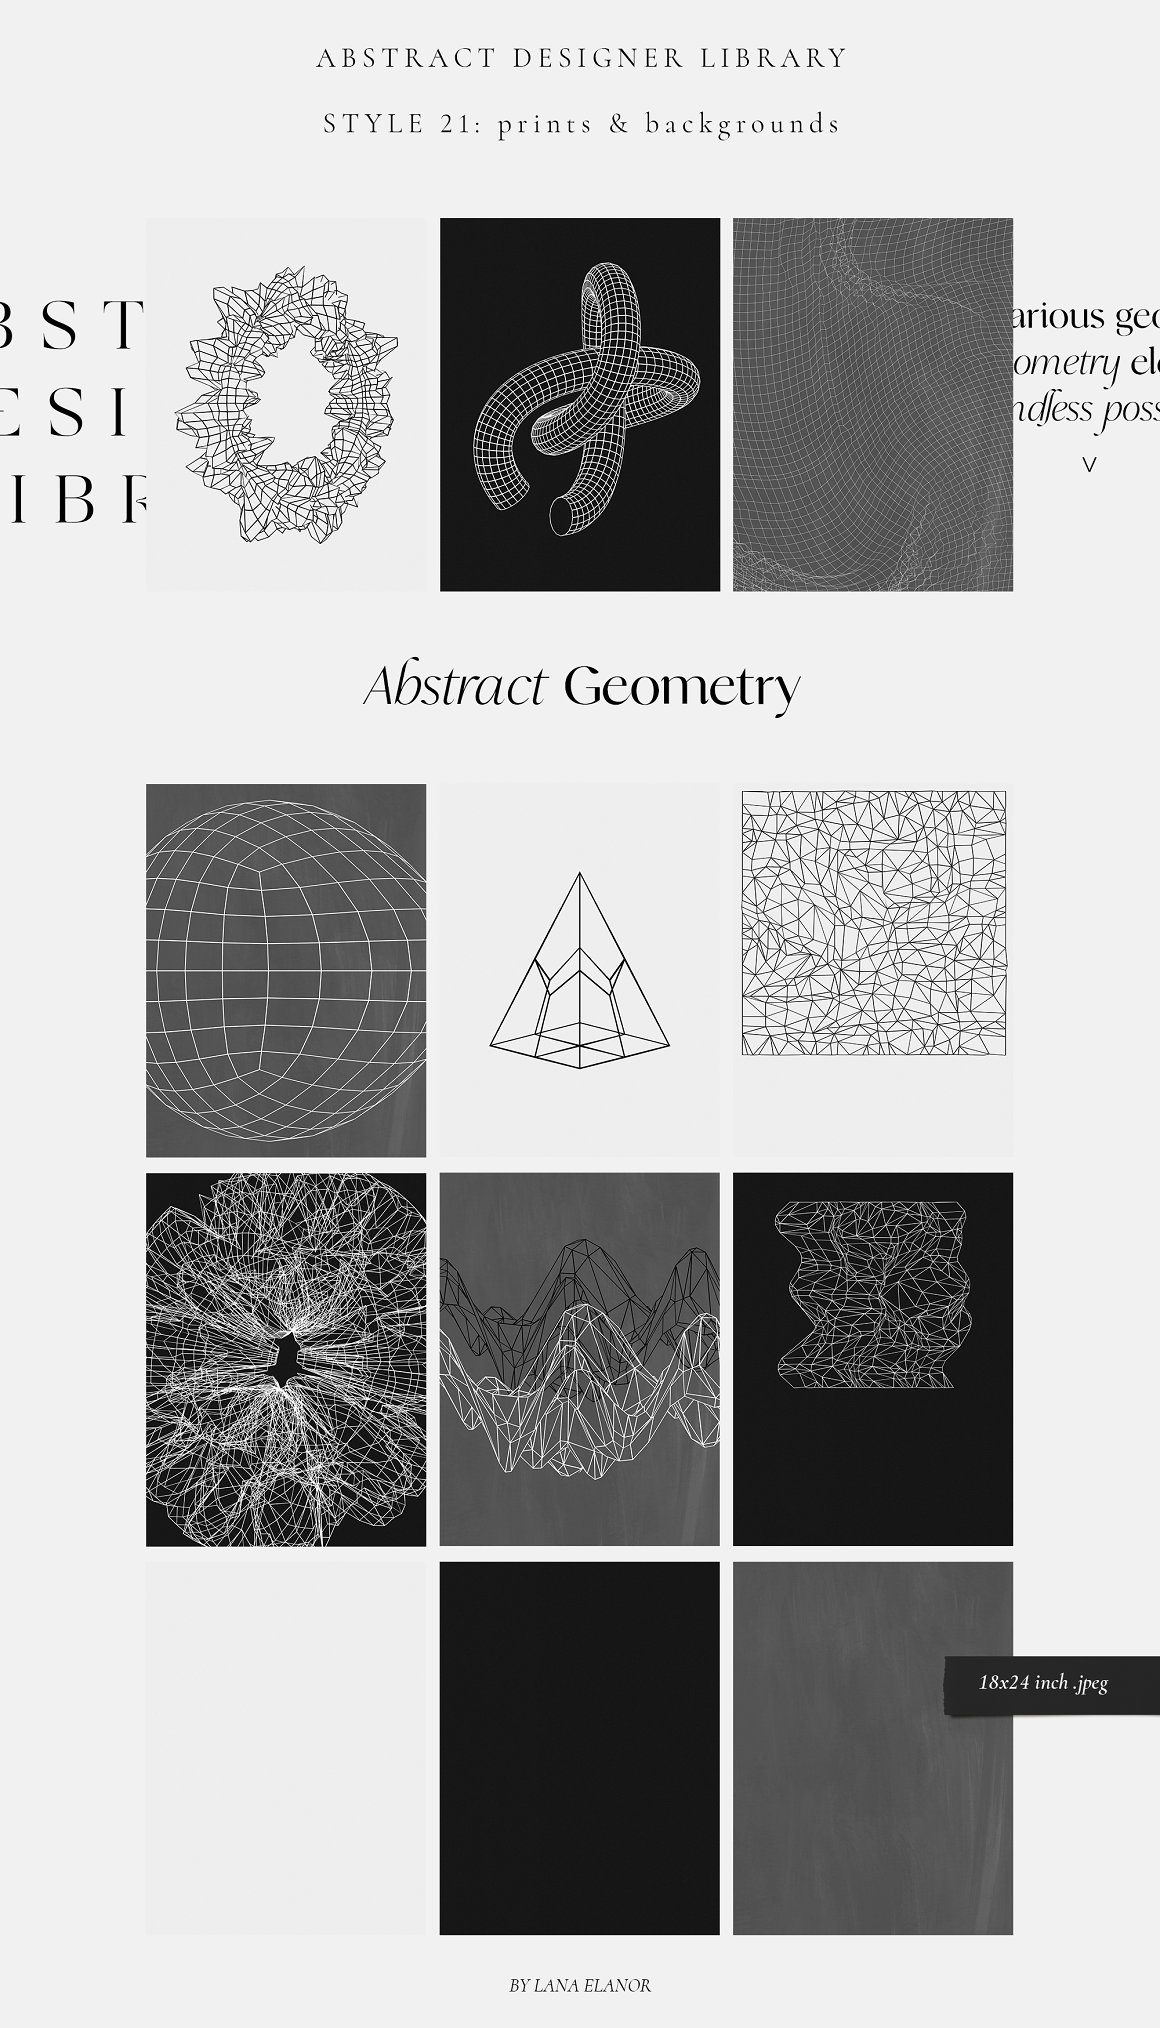 Abstract geometry designer library on a gray background.